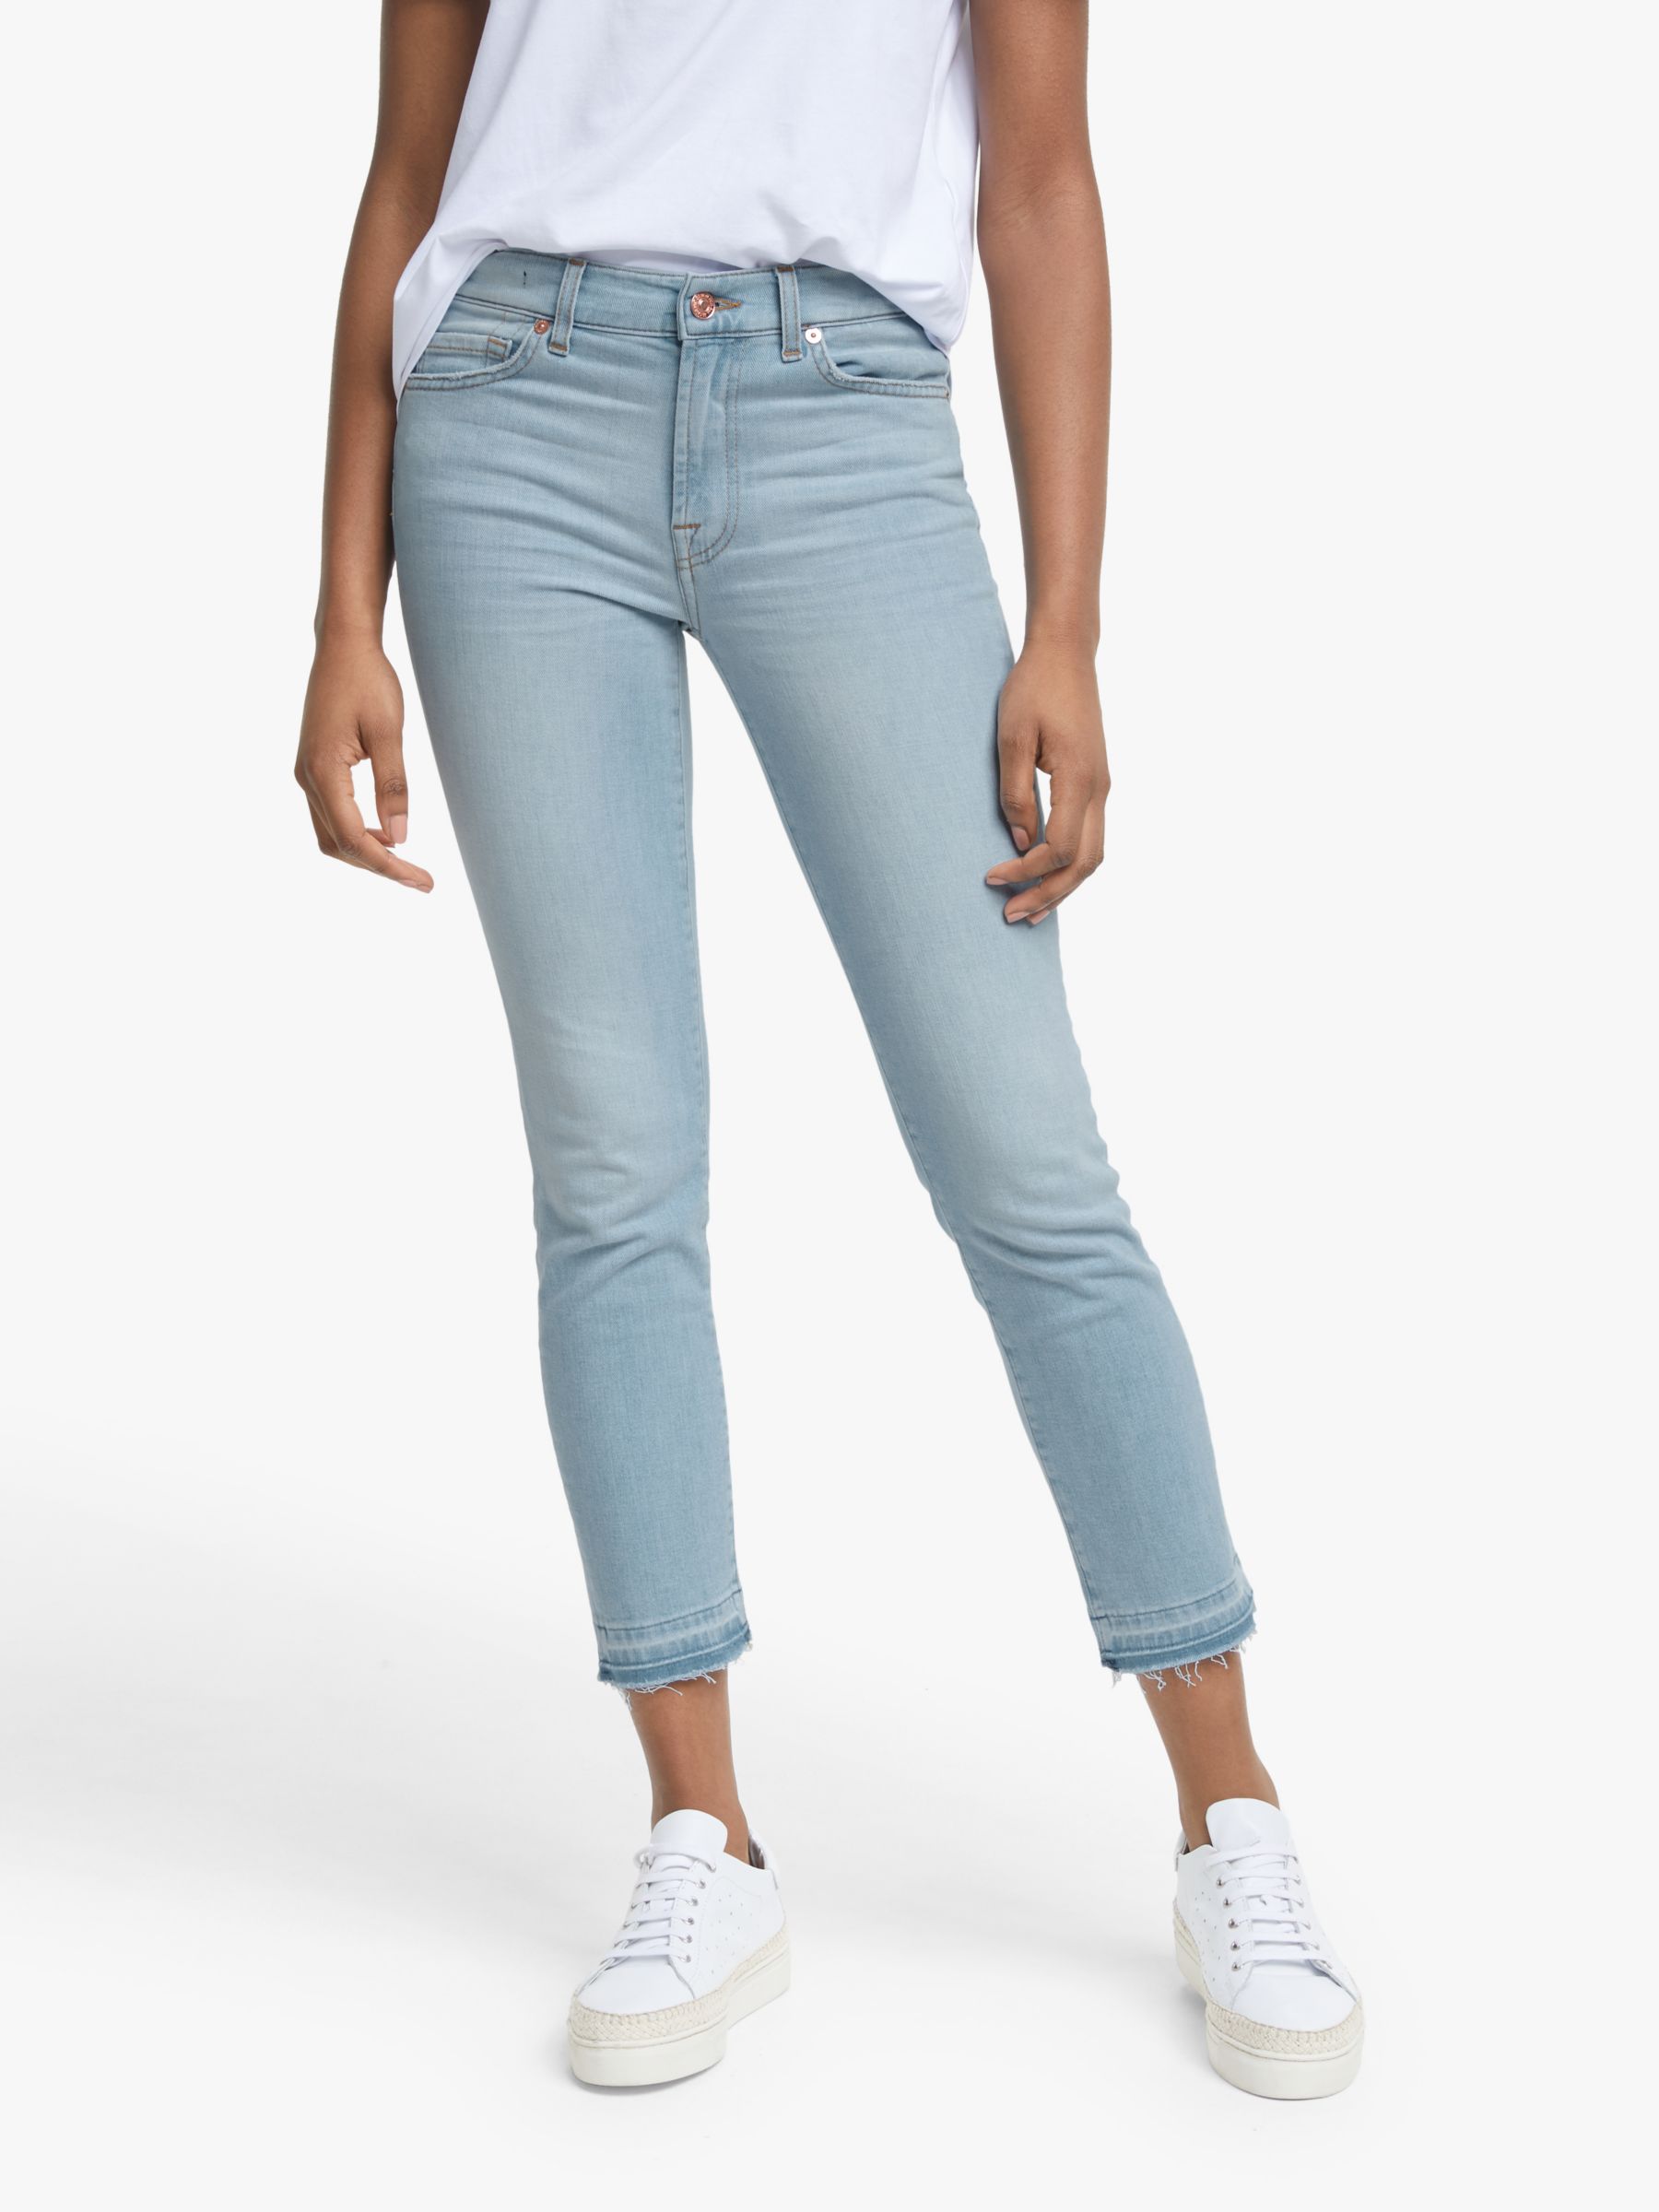 7 for all mankind roxanne ankle frayed hem jeans